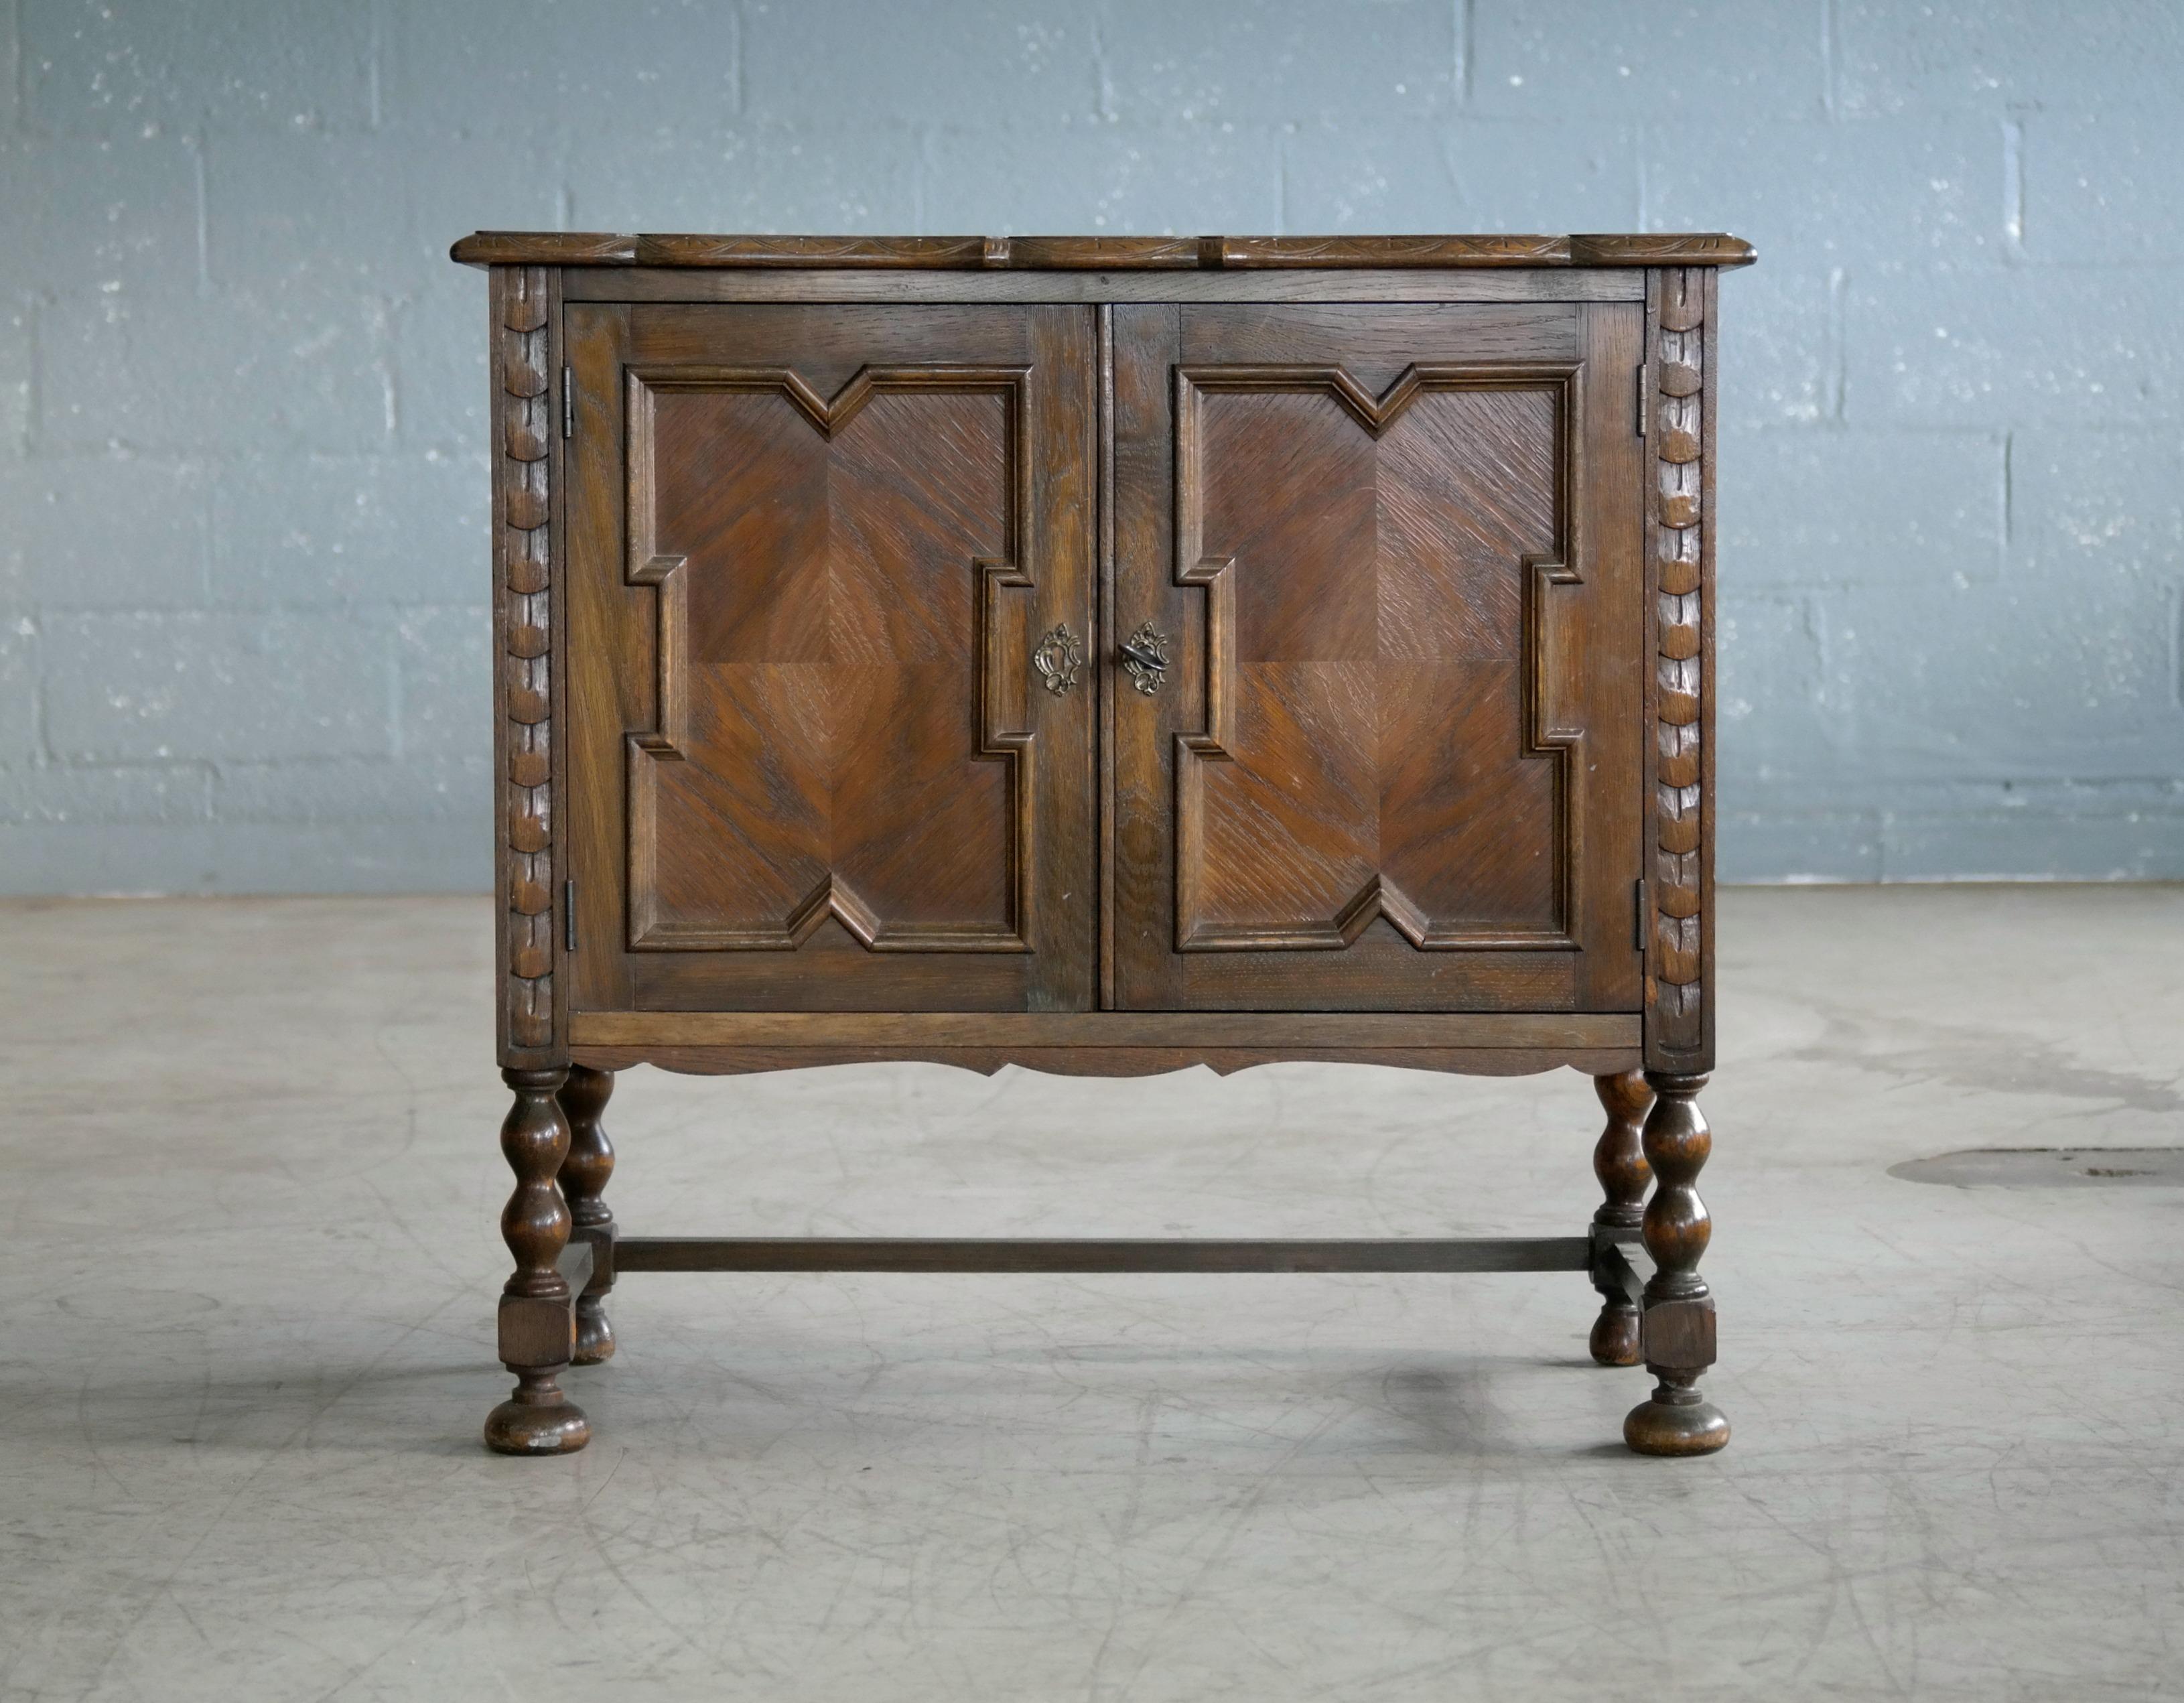 Beautiful small cabinet or console attributed to Axel Einar Hjorth and exemplifying his fine craftsmanship and recognizable design. Made from carved stained oak. The top has been professionally refinished. Made in Sweden circa 1940s. Unmarked.